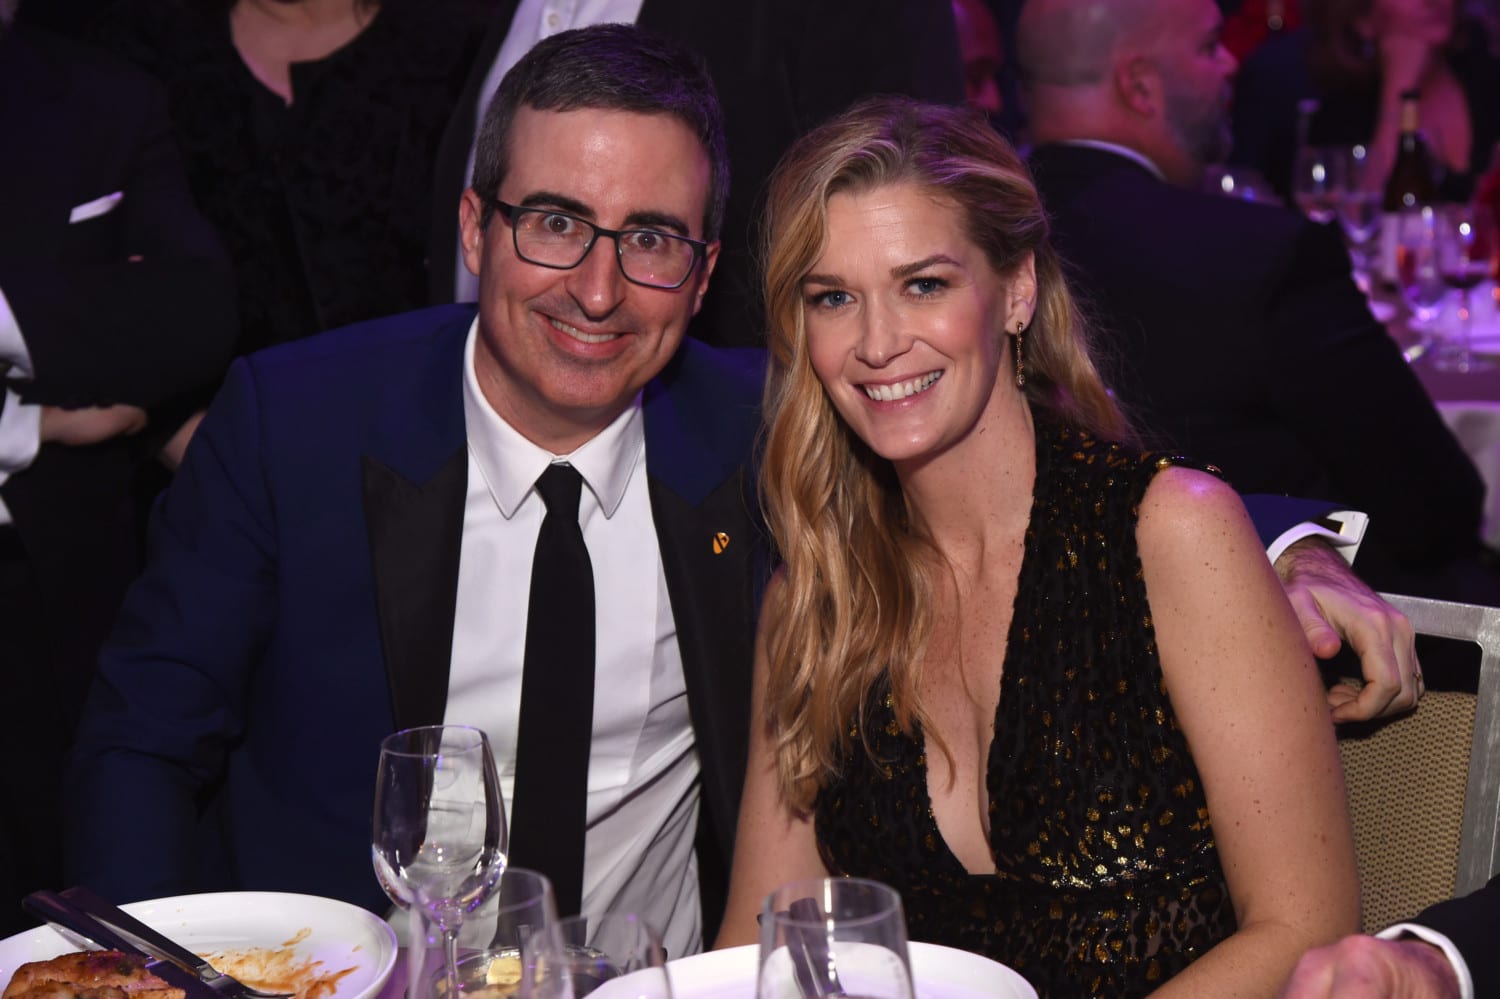 John Oliver and Kate norley photo